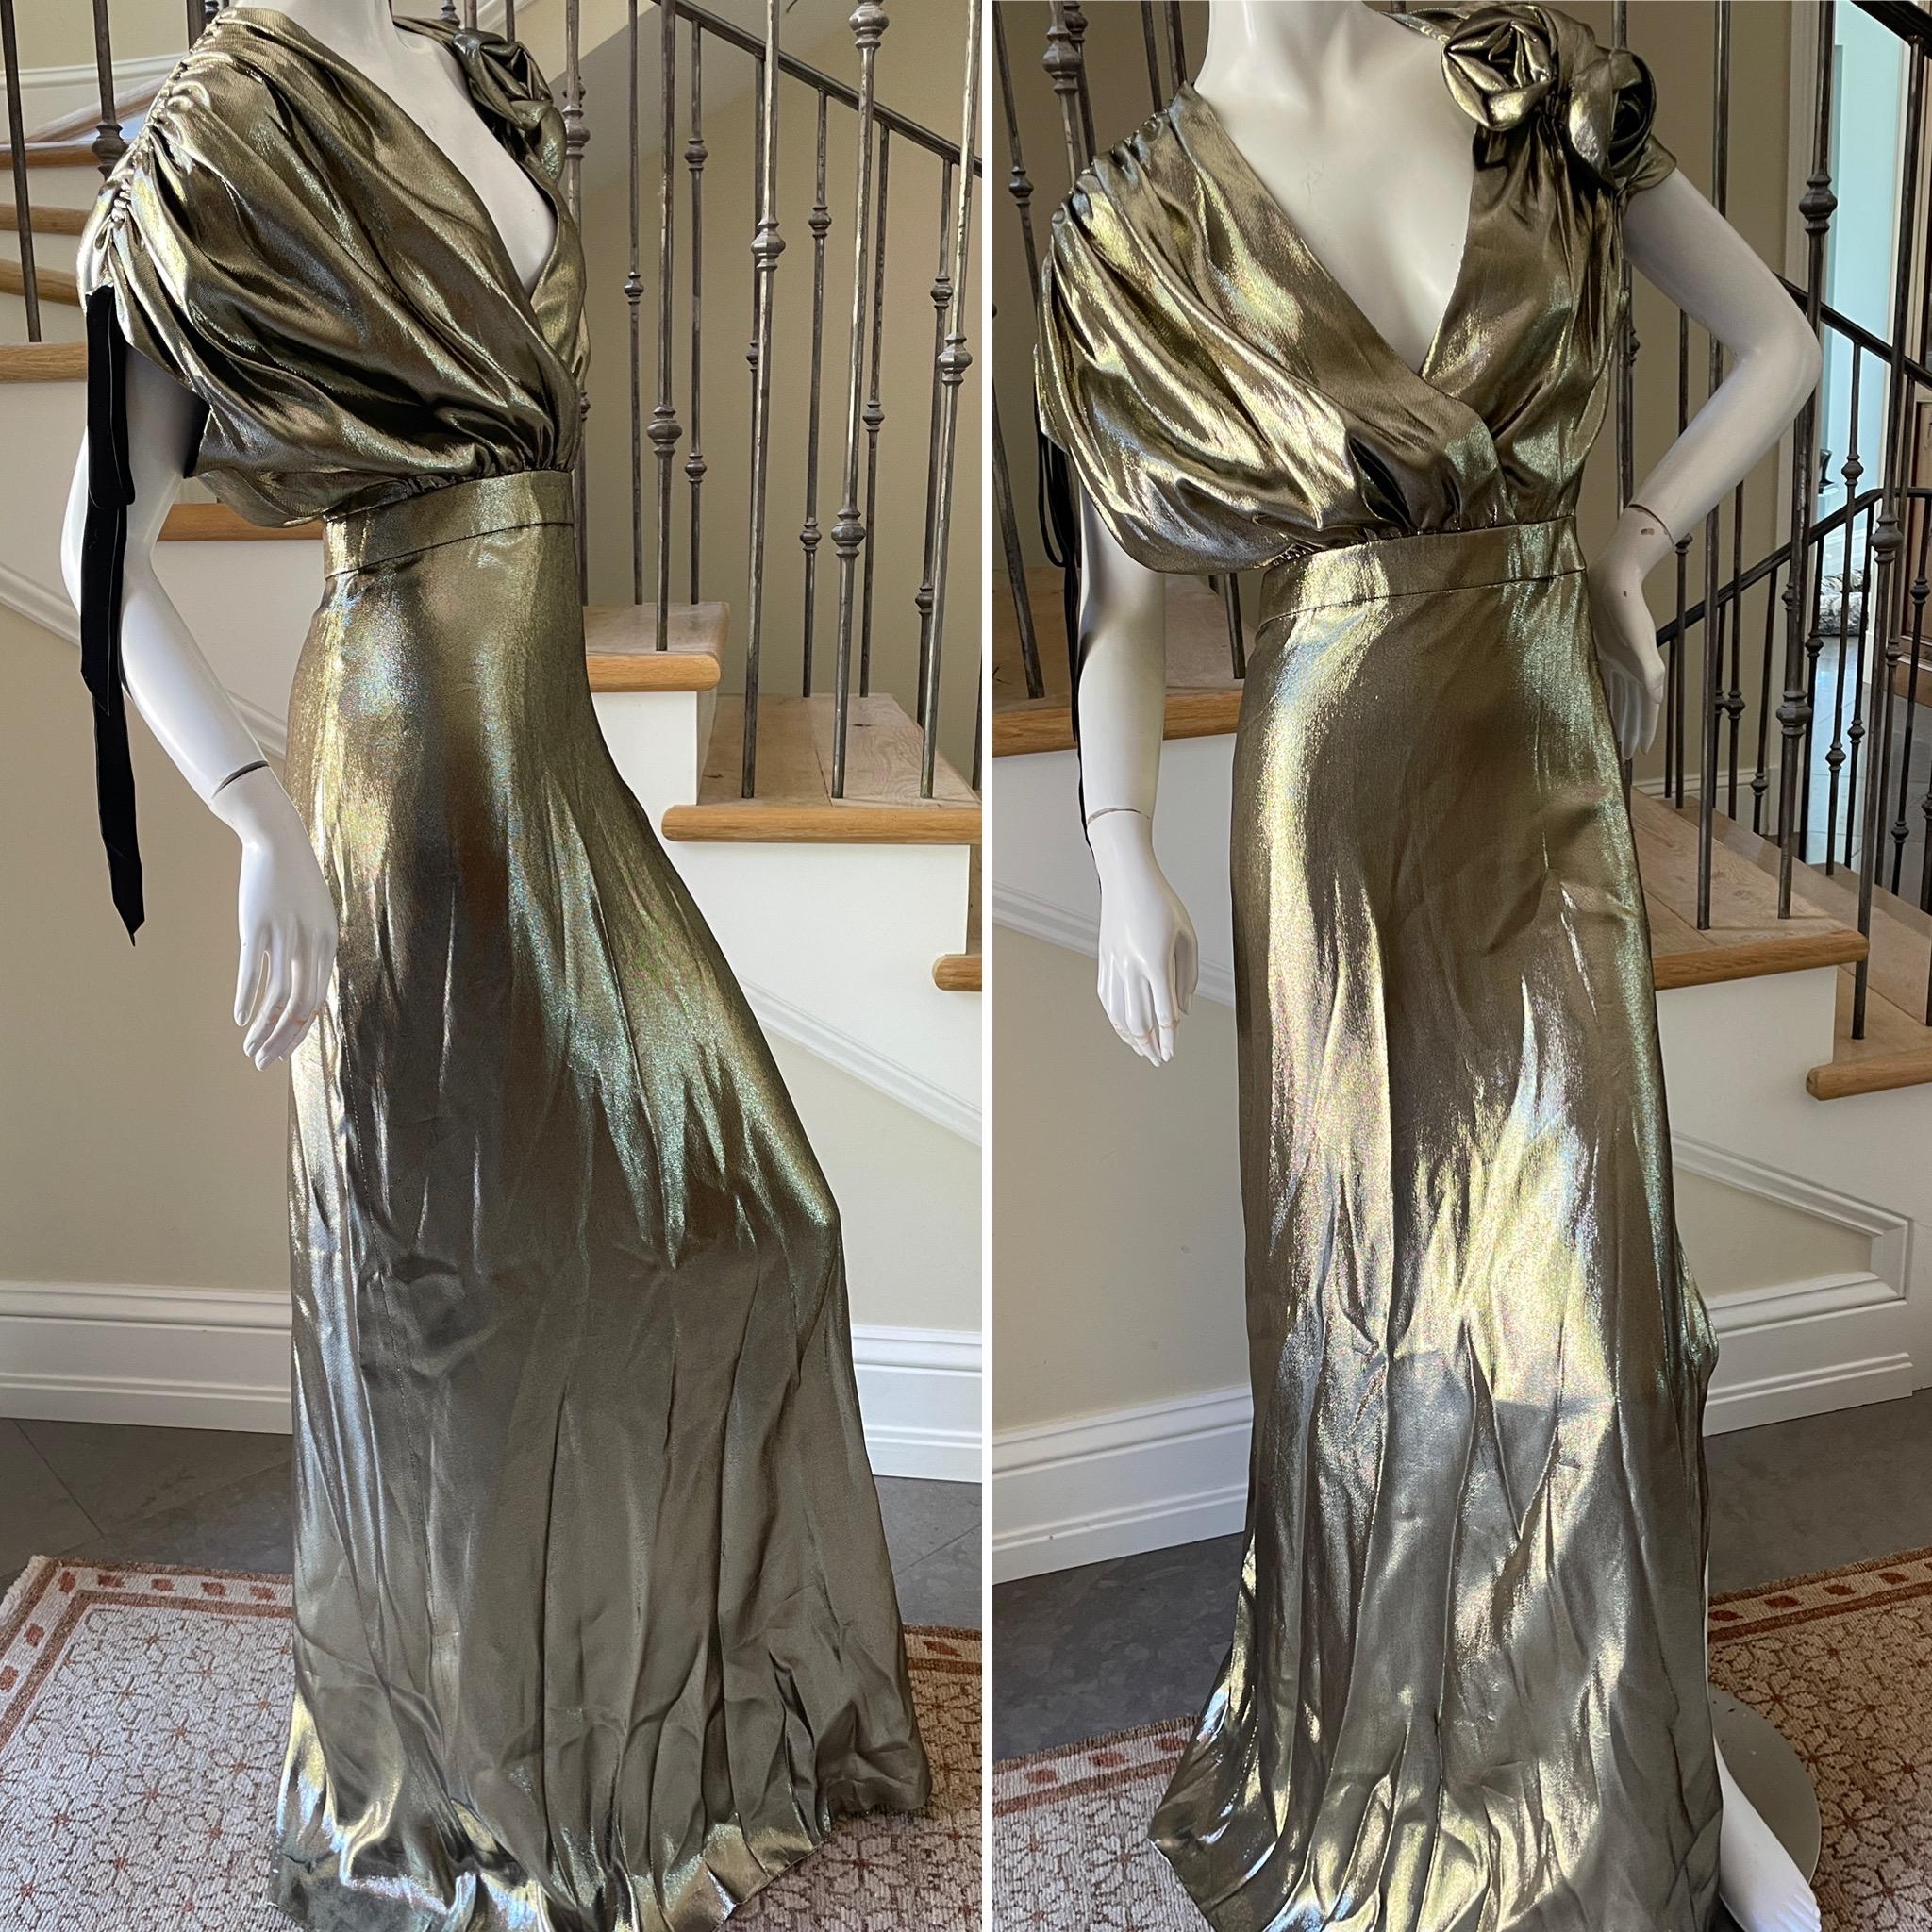 Lanvin by Alber Elbaz Gold 1930's Style Goddess Gown
 NWT $4590
 So beautiful, much prettier in person.
This is exquisite.
Size 36
 Bust 36